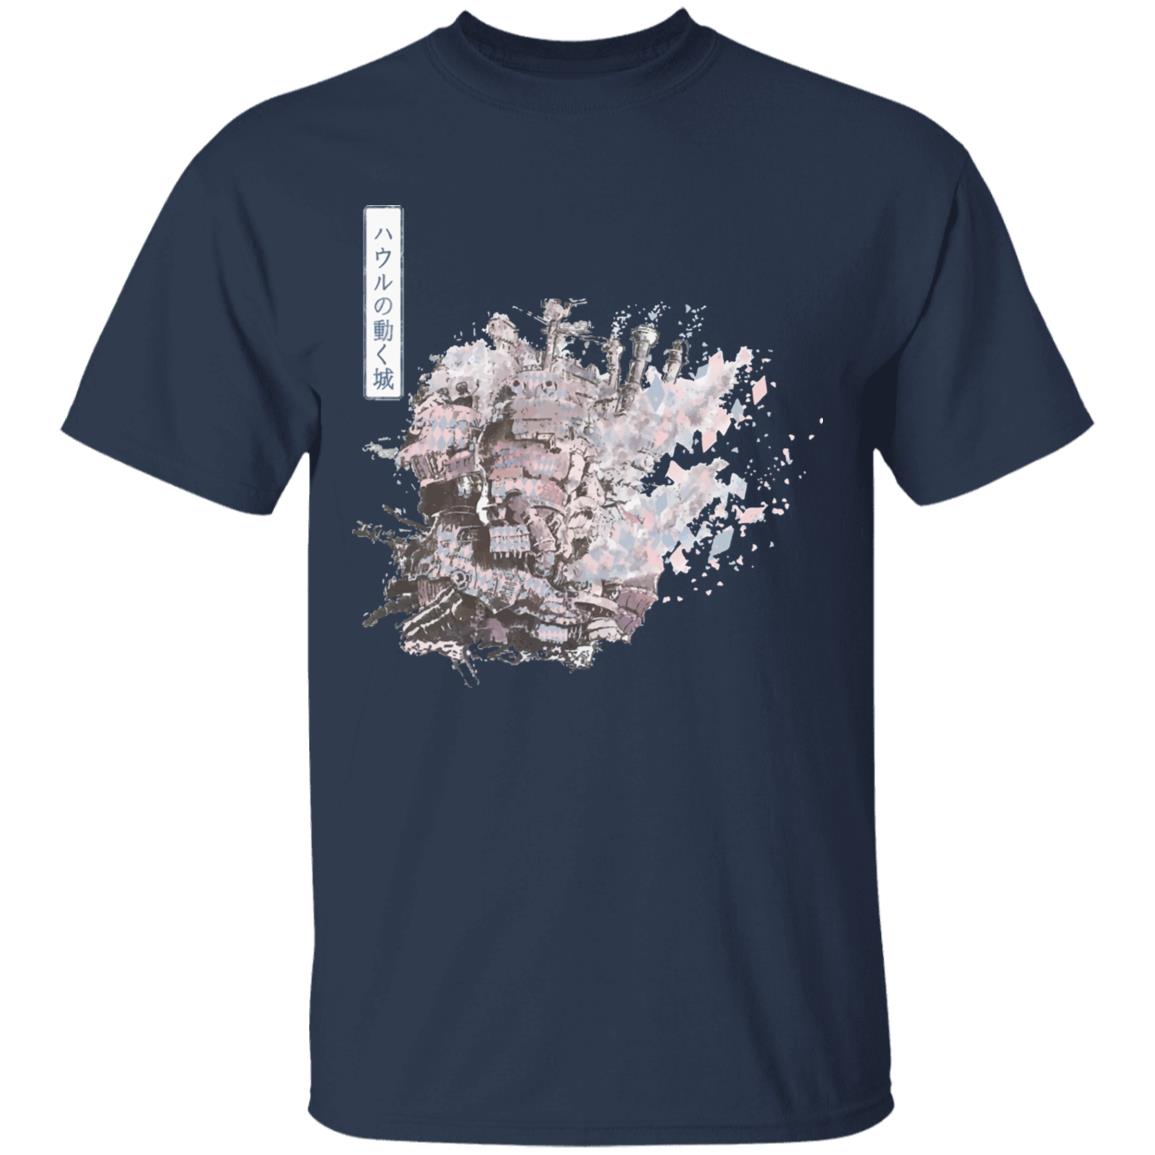 Howl’s Moving Castle Classic T Shirt